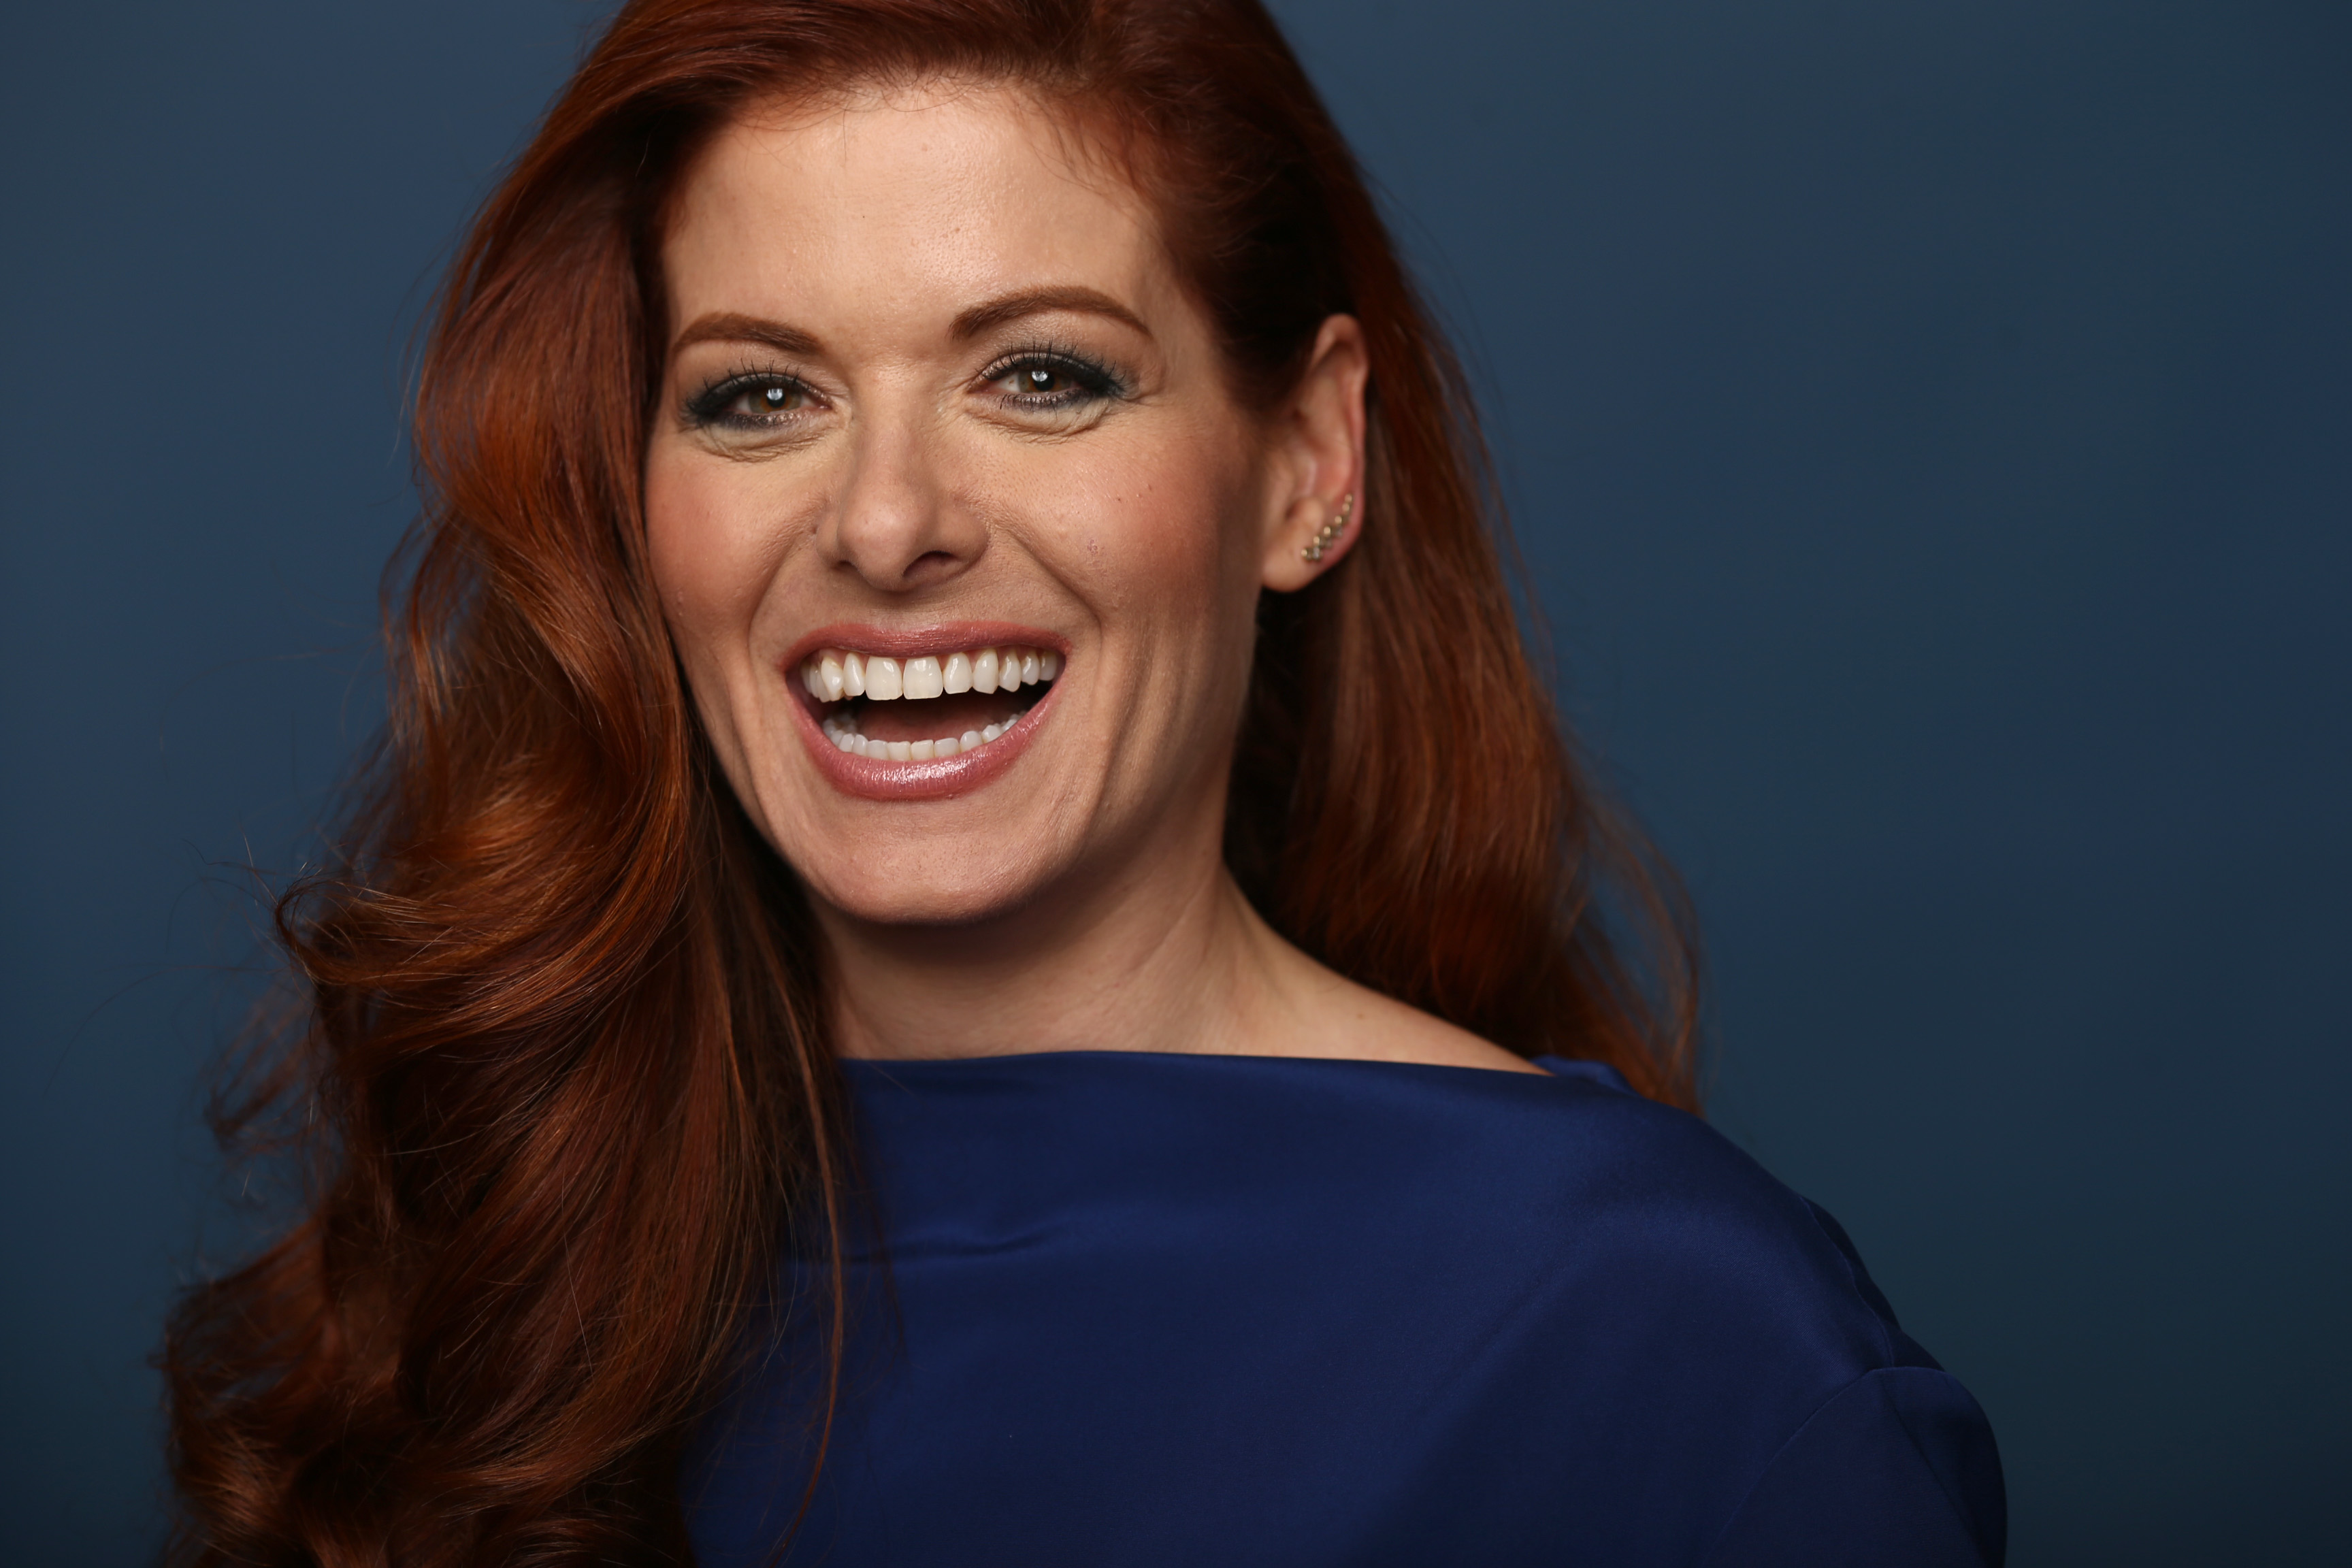 Debra Messing poses for a portrait during the NBCUniversal Press Tour at the Beverly Hilton